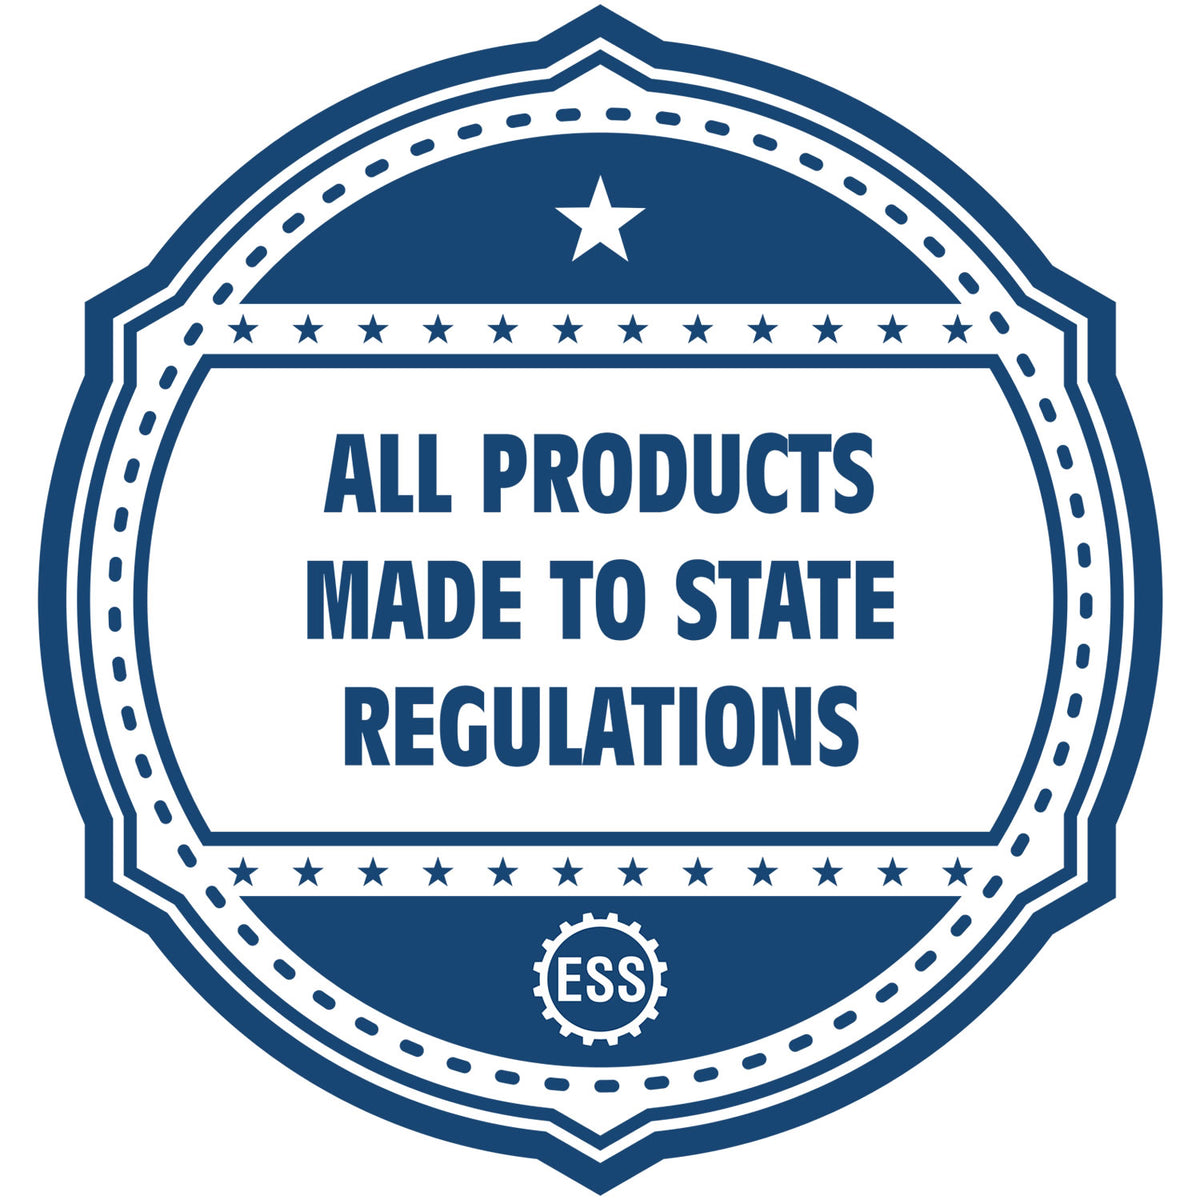 A blue icon or badge for the Gift South Carolina Engineer Seal showing that this product is made in compliance with state regulations.